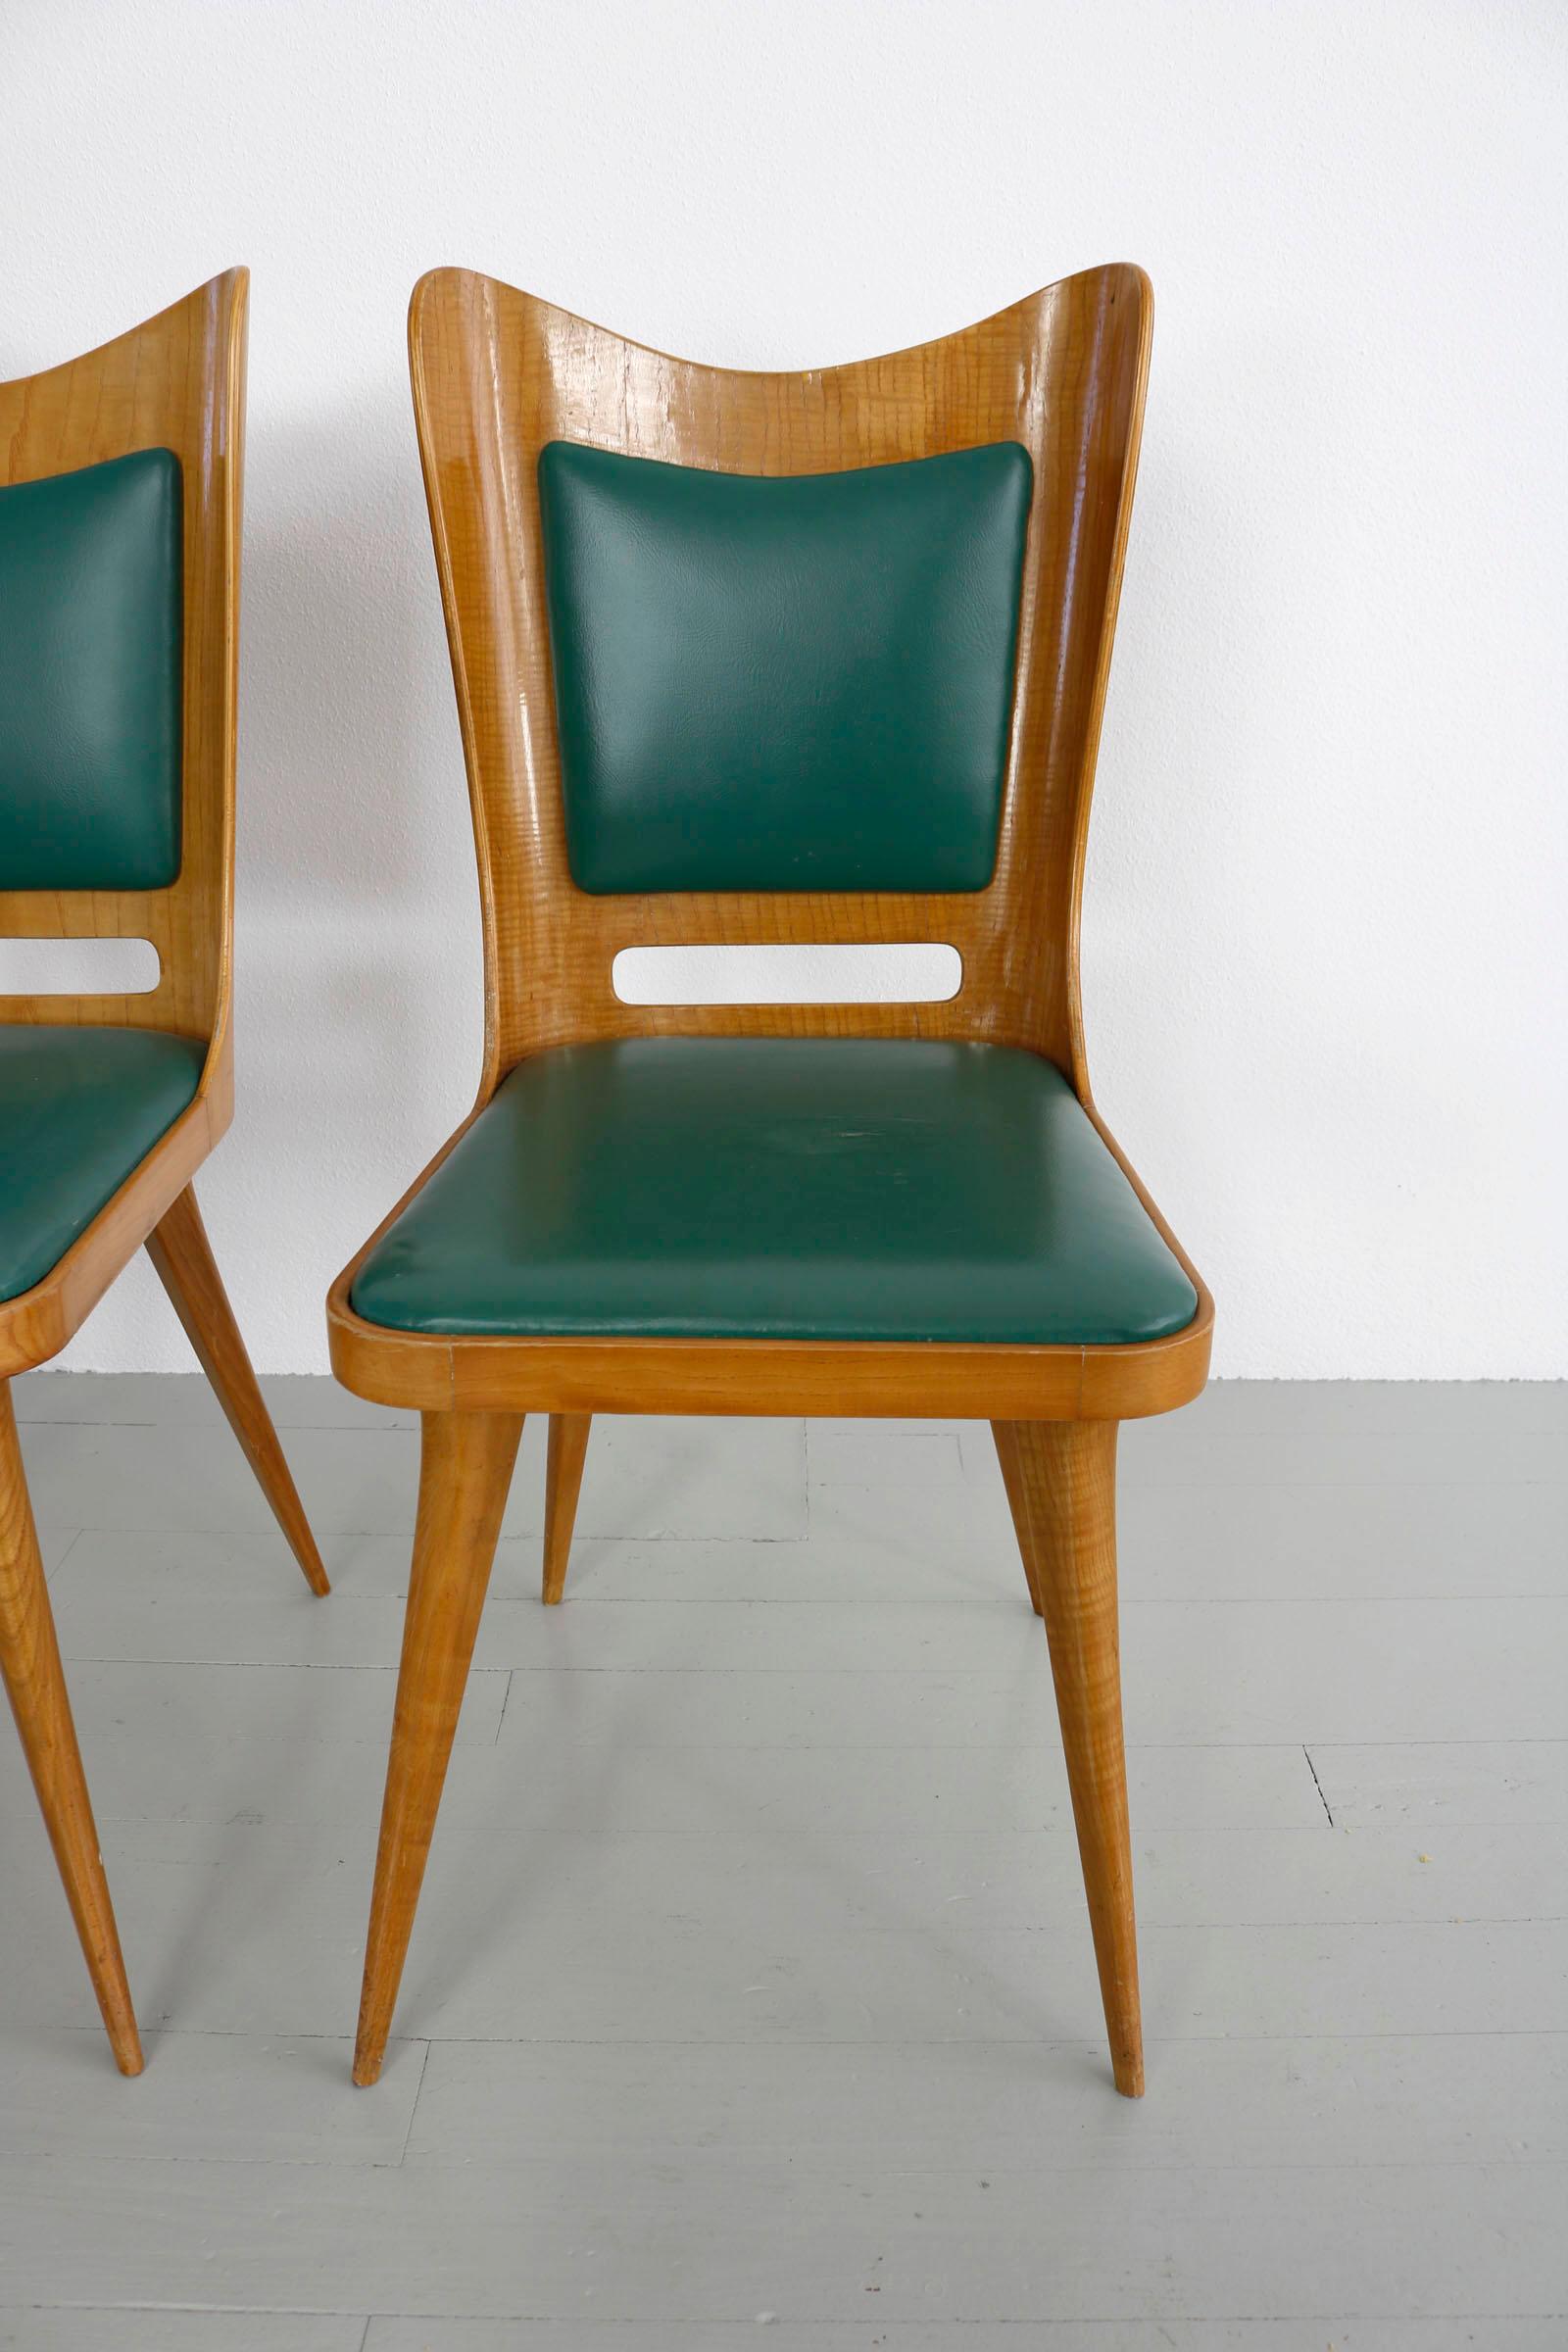 Set of Six Italian Wooden Dining Chairs with Green Upholstery, 1950 For Sale 12